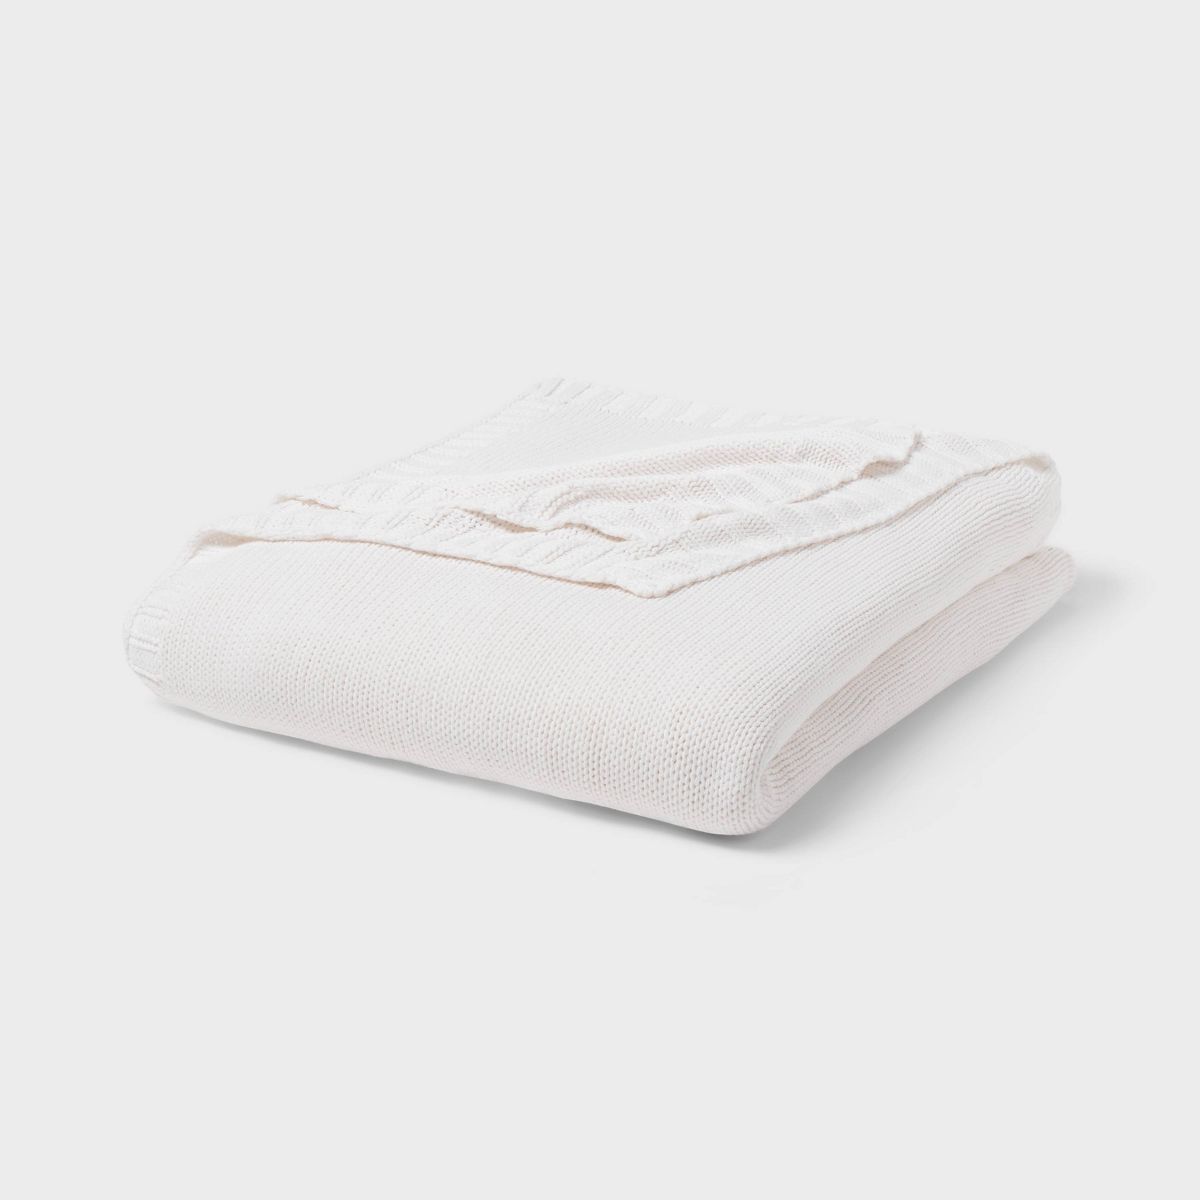 Sweater Knit Bed Blanket - Threshold™ | Target